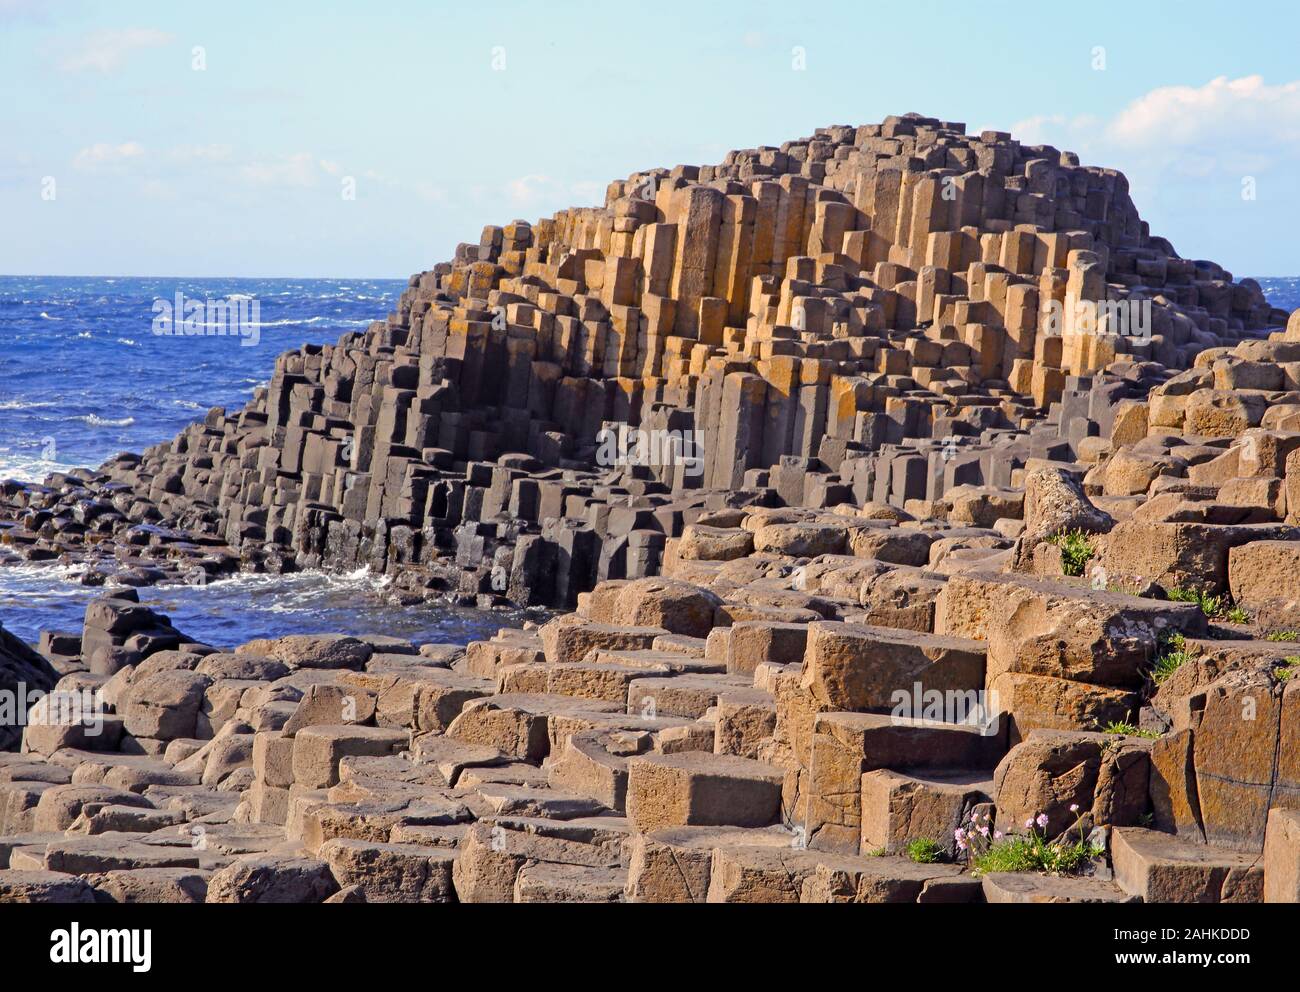 Basalt columns and stepping stones of Giant's Causeway with pink thrift flowers growing in the cracks forming the coastline, Giant's Causeway, County Stock Photo